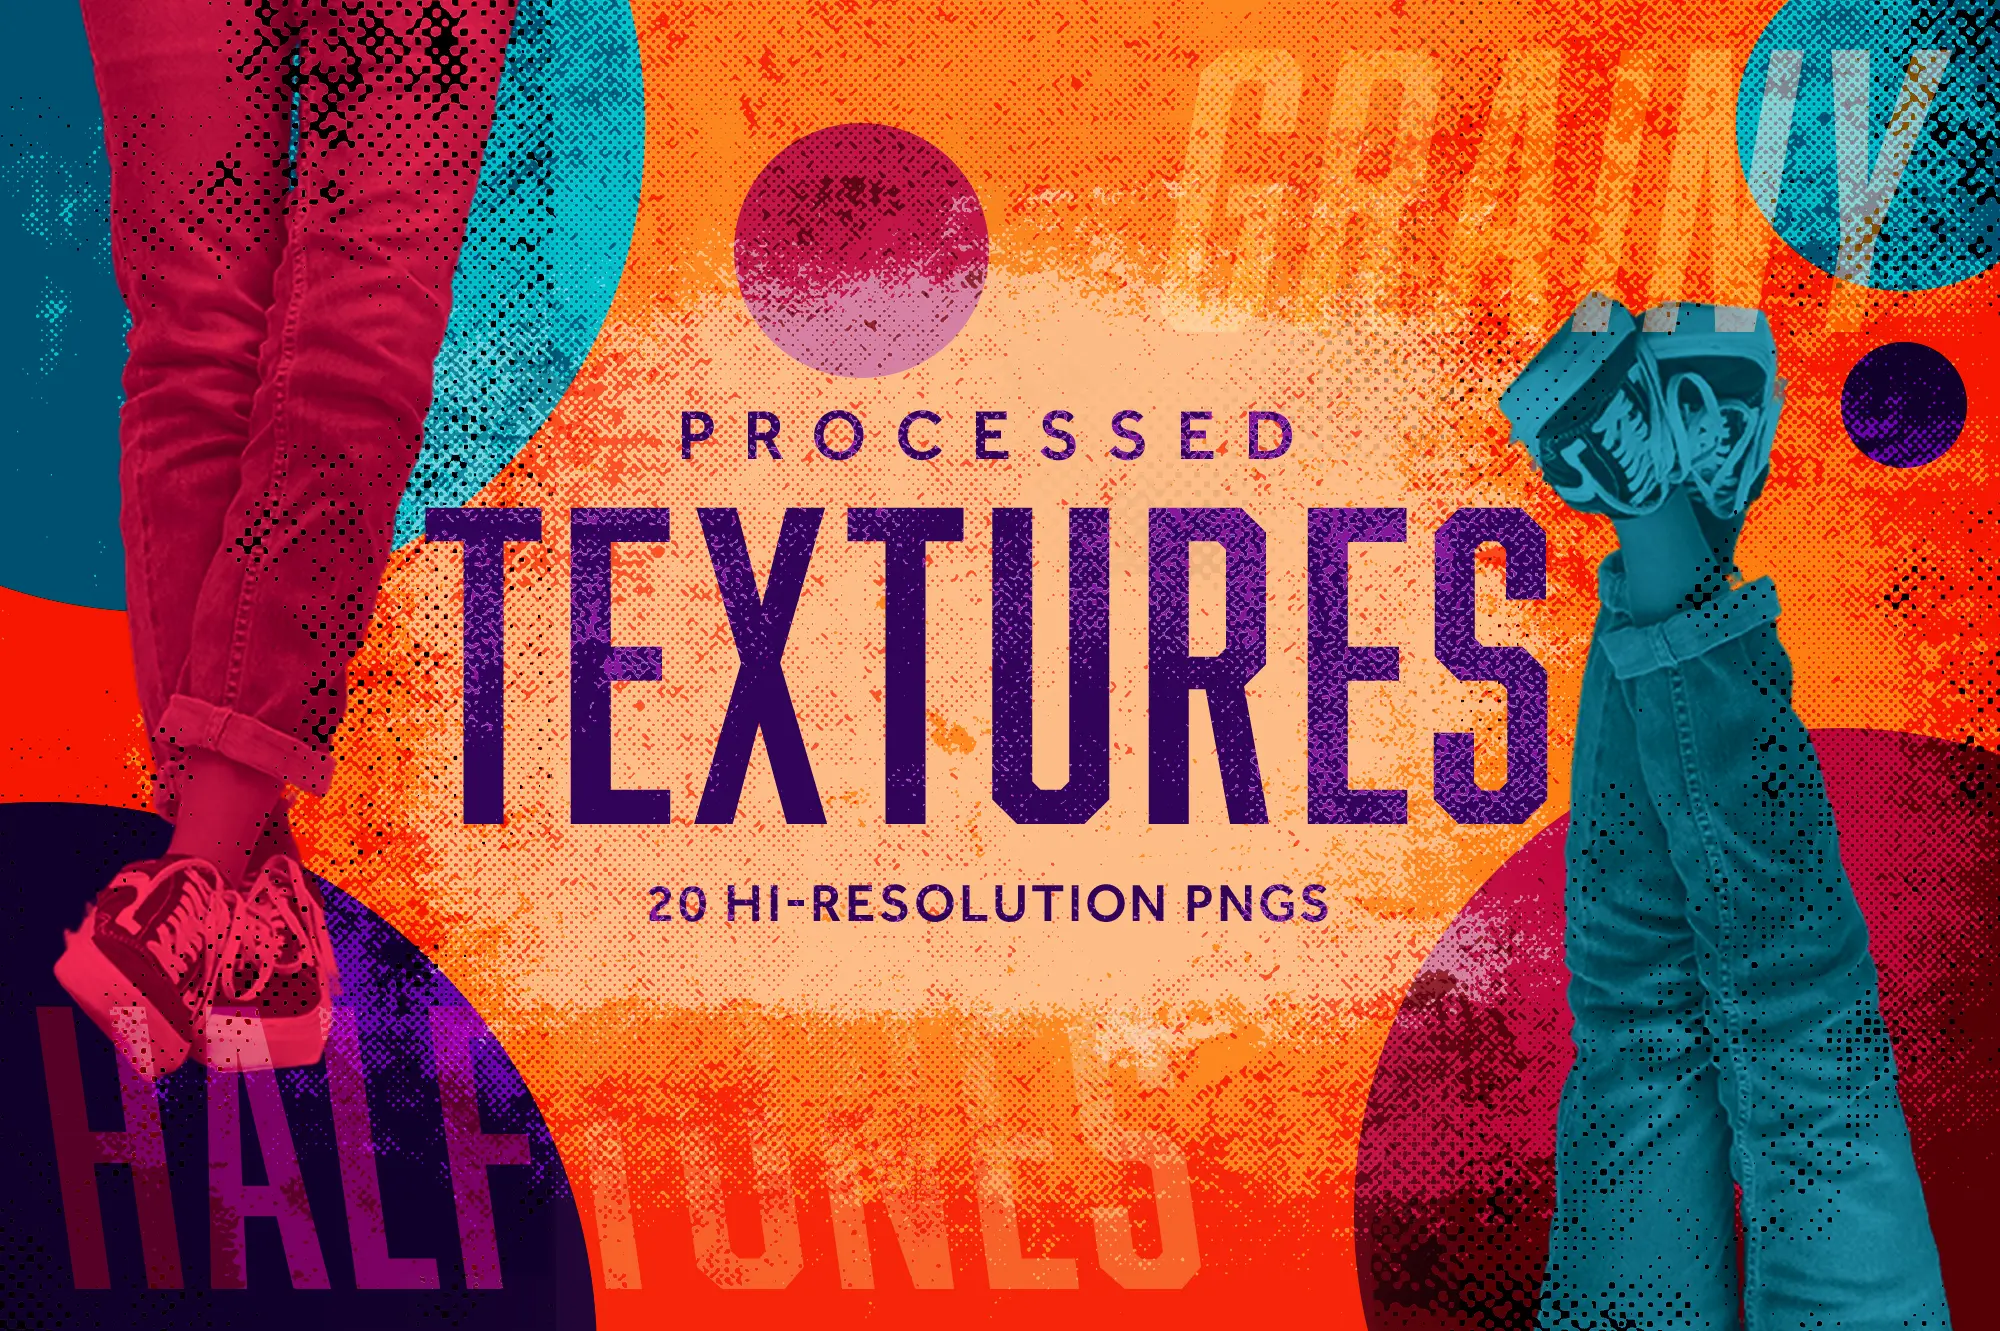 Add A Vibrant Edge To Your Church Media With Our 'Processed Textures' Graphic Pack. These High-Resolution Pngs Are Crafted For Maximum Visual Impact, Offering An Energetic And Dynamic Resource For Your Creative Church Design Project.